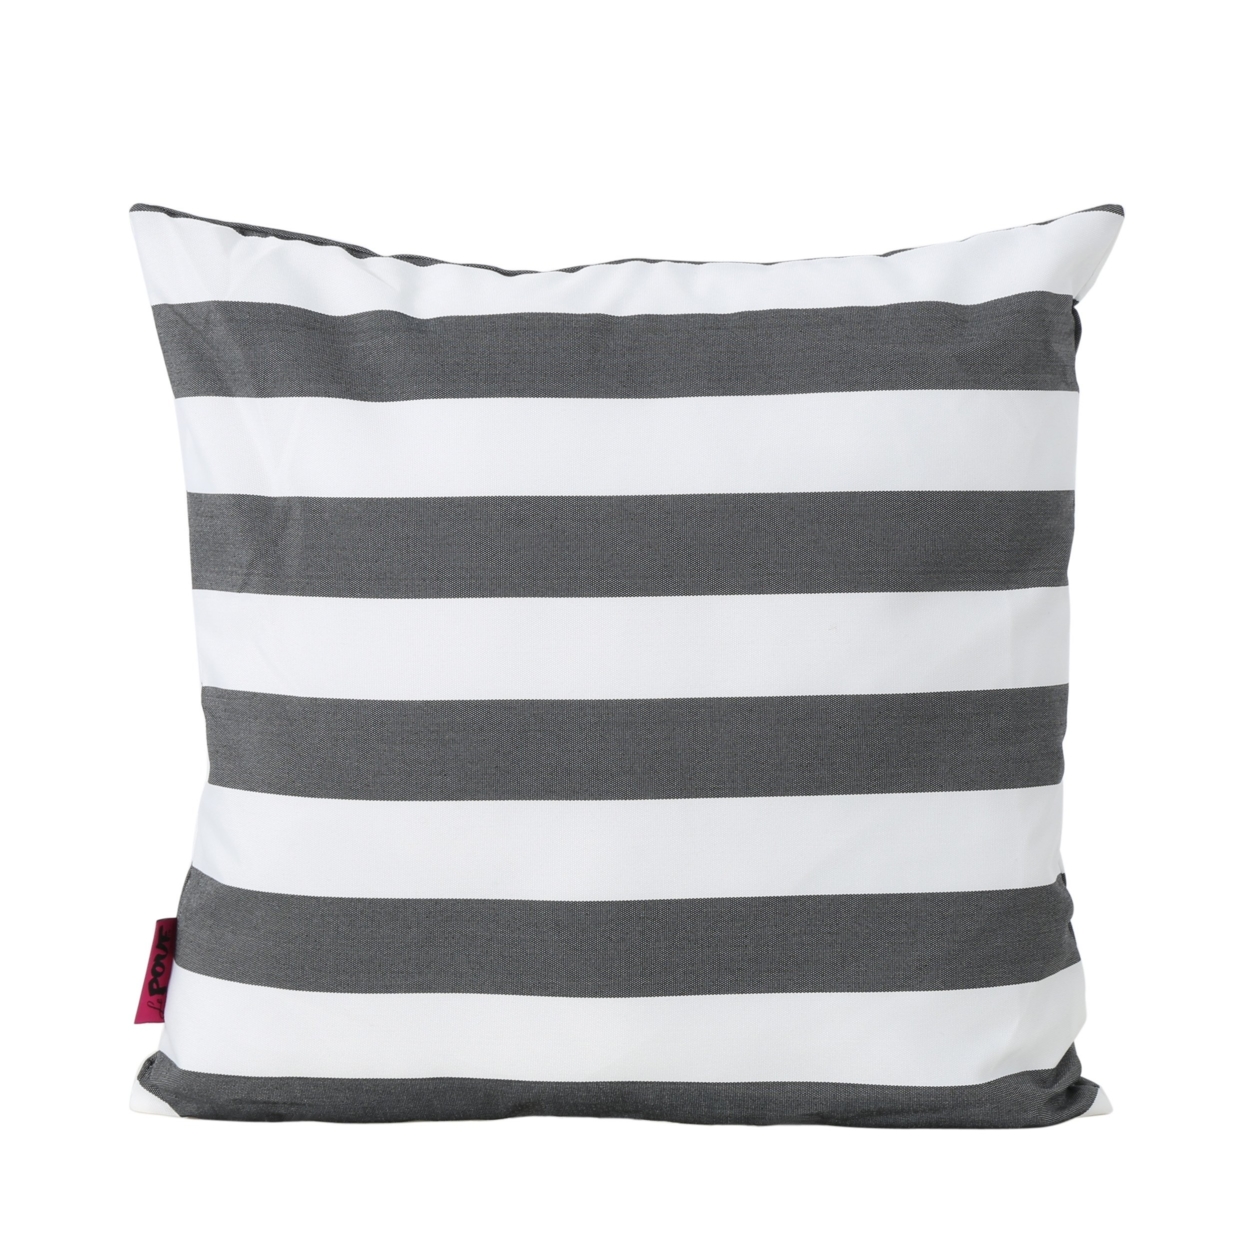 La Mesa Indoor Striped Water Resistant Square Throw Pillow - Brown/white, Single